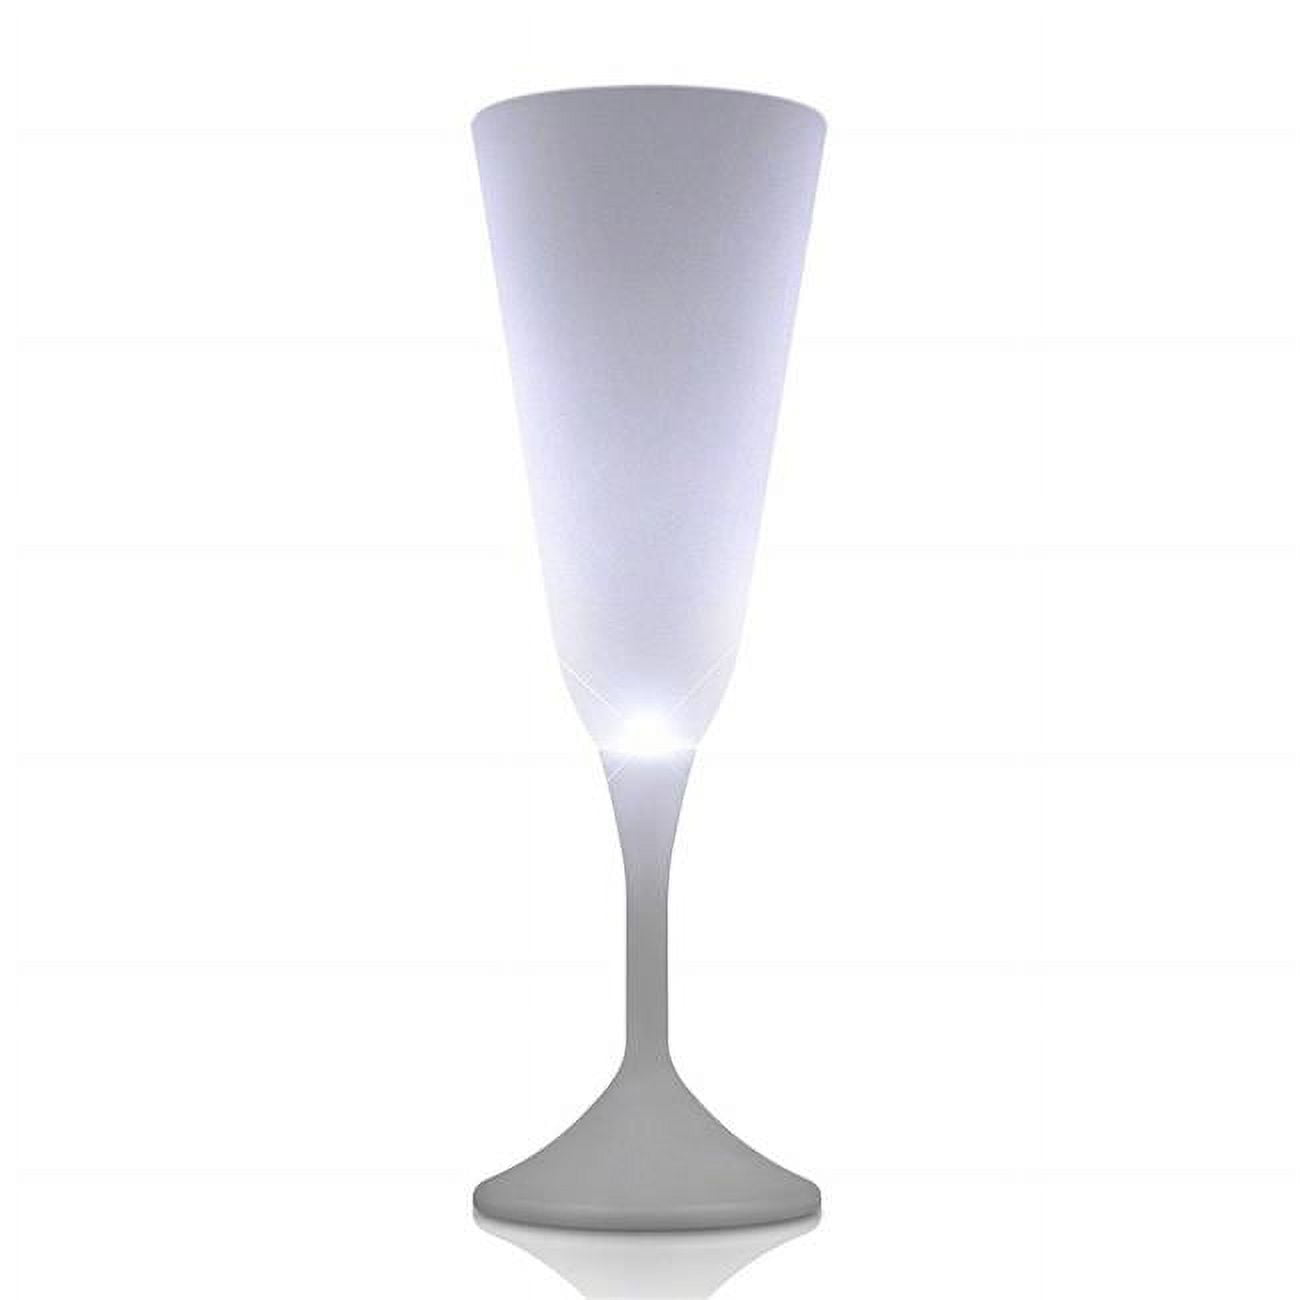 Picture of Blinkee STWLCWG-WT Steady White LED Champagne Wine Glass